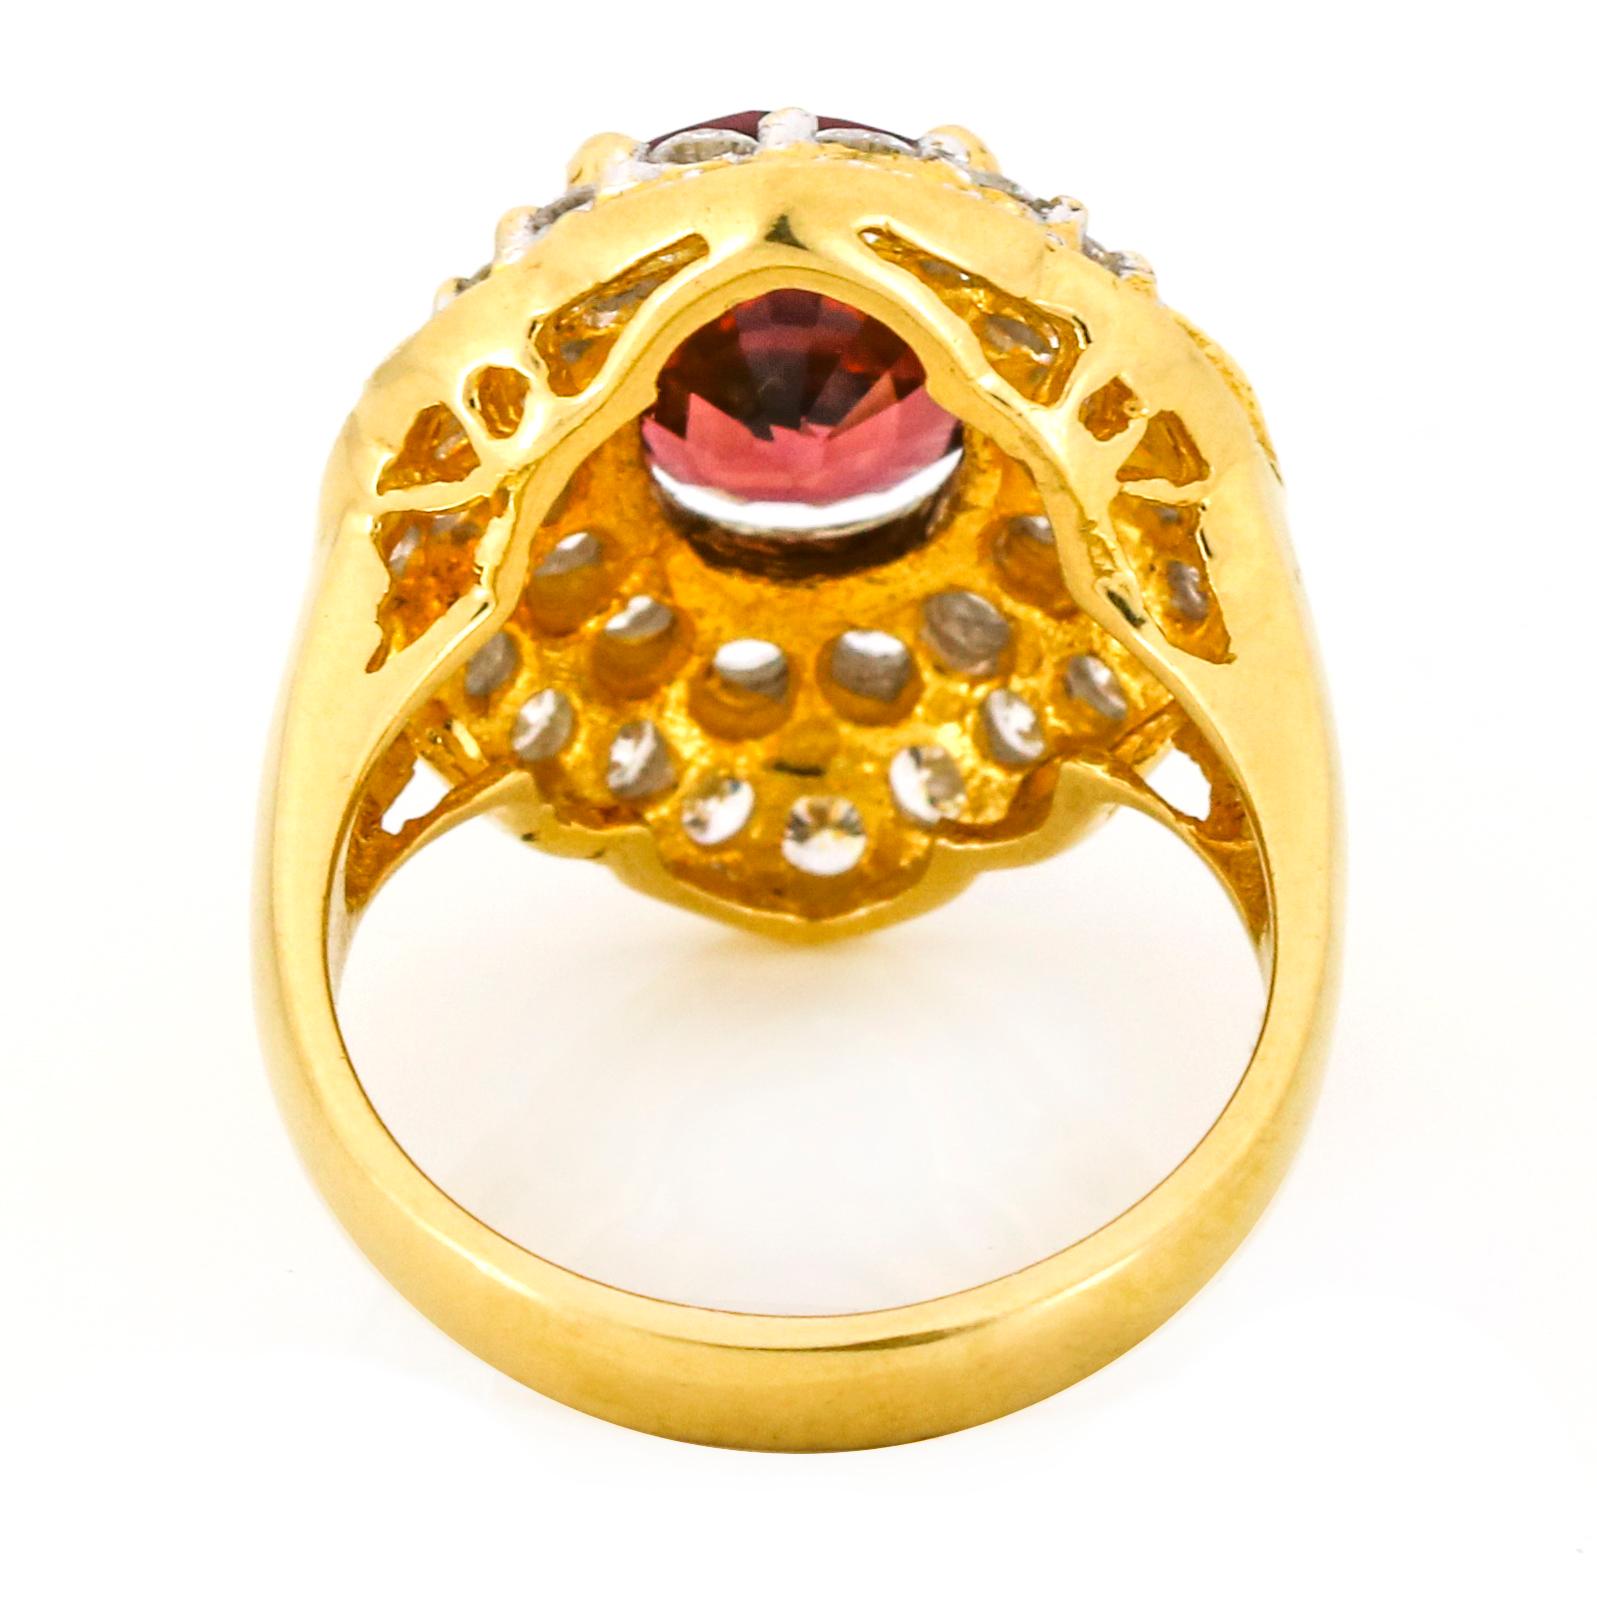 Women's GIA 3.25 Carat Red Spinel Diamond Cocktail Ring in 18 Karat Yellow Gold For Sale